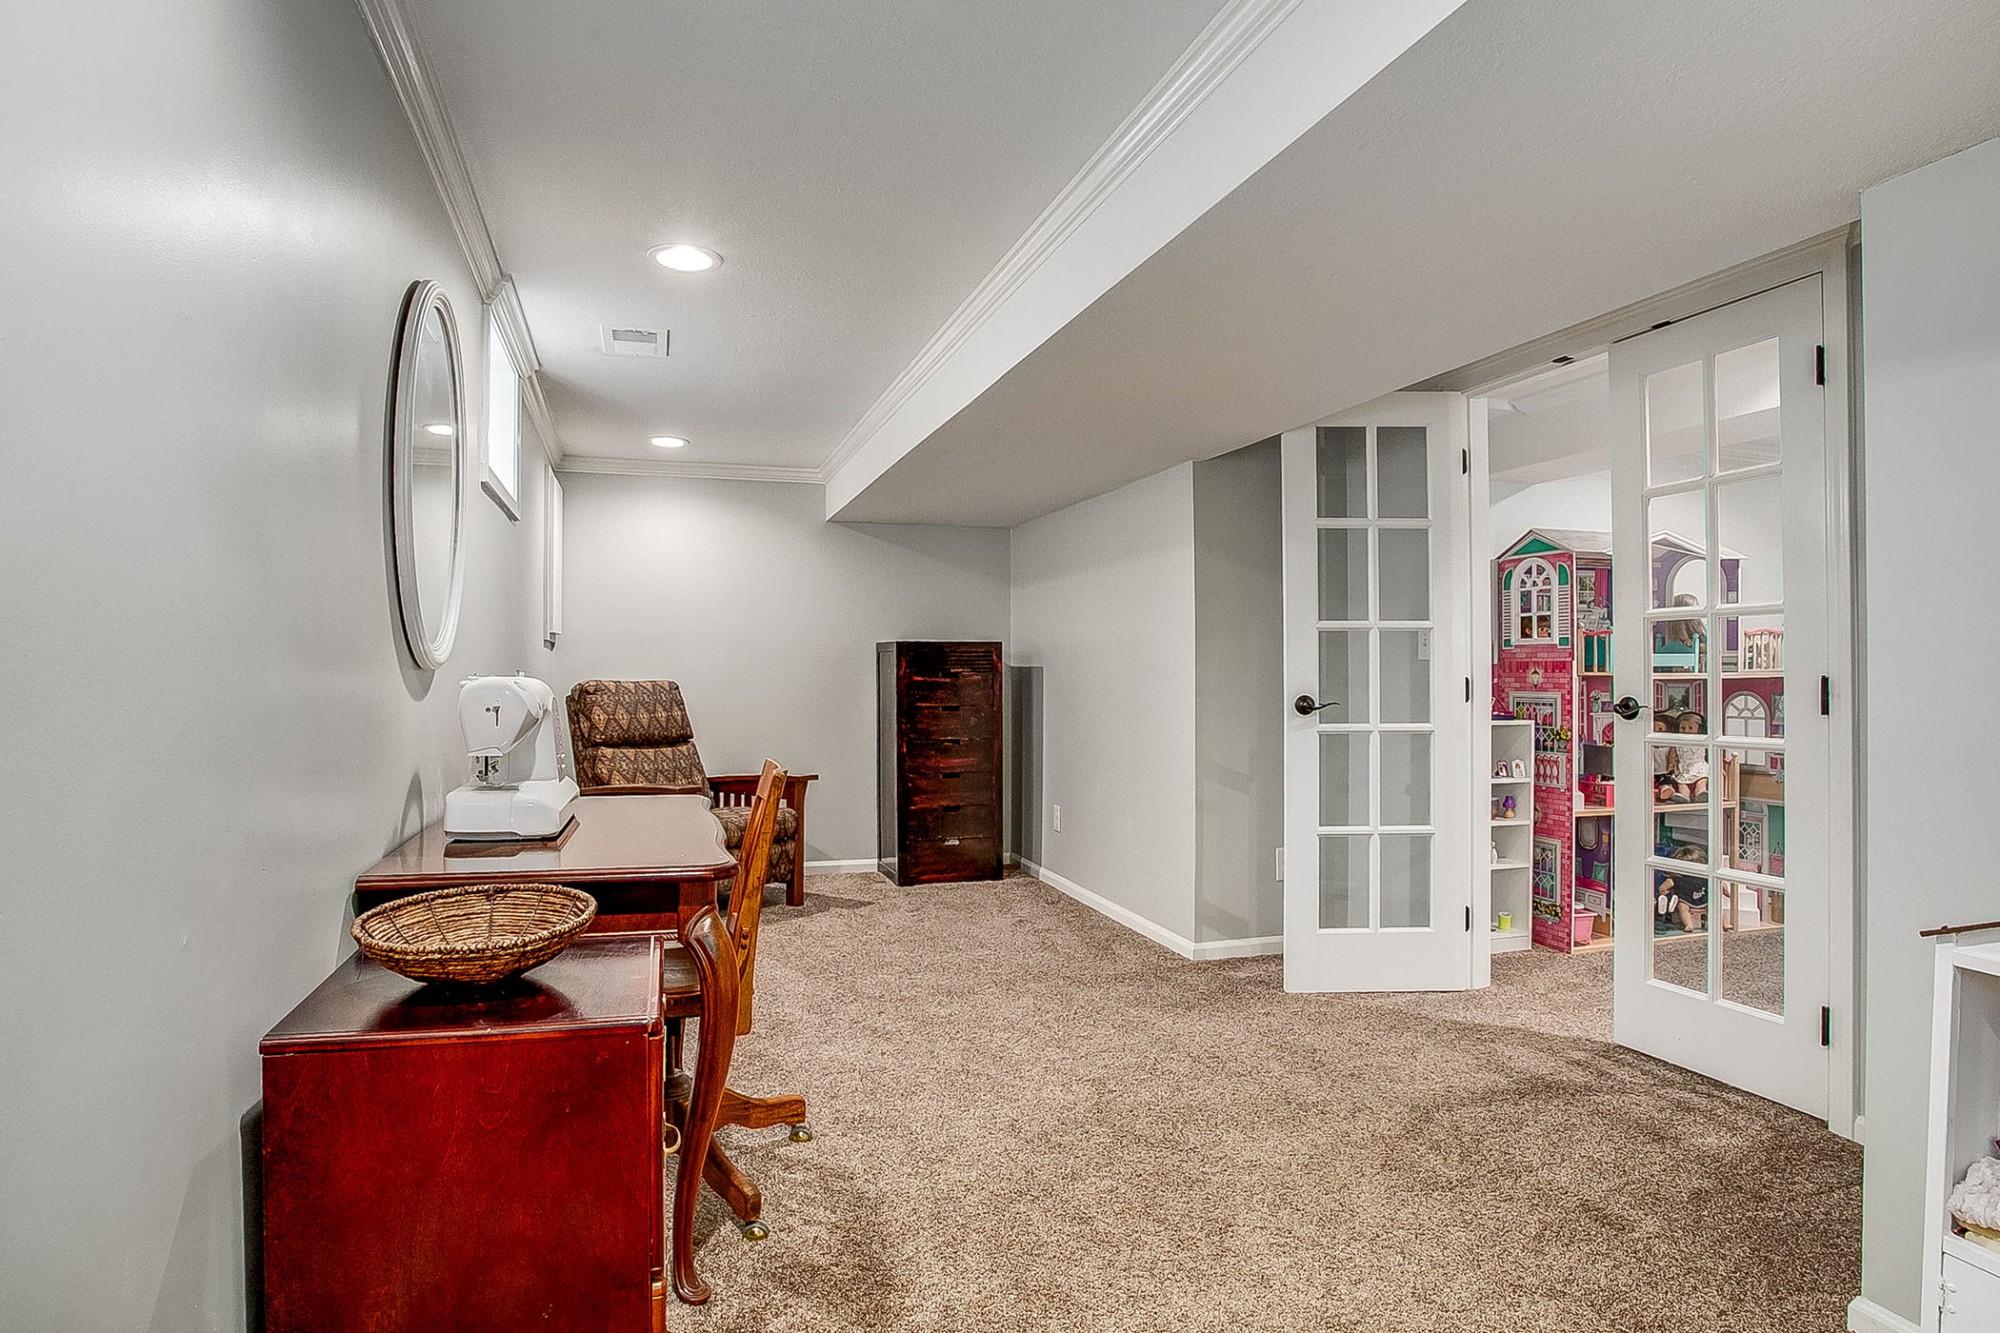 This bonus room is the perfect space for a home office, study, craft or hobby room.